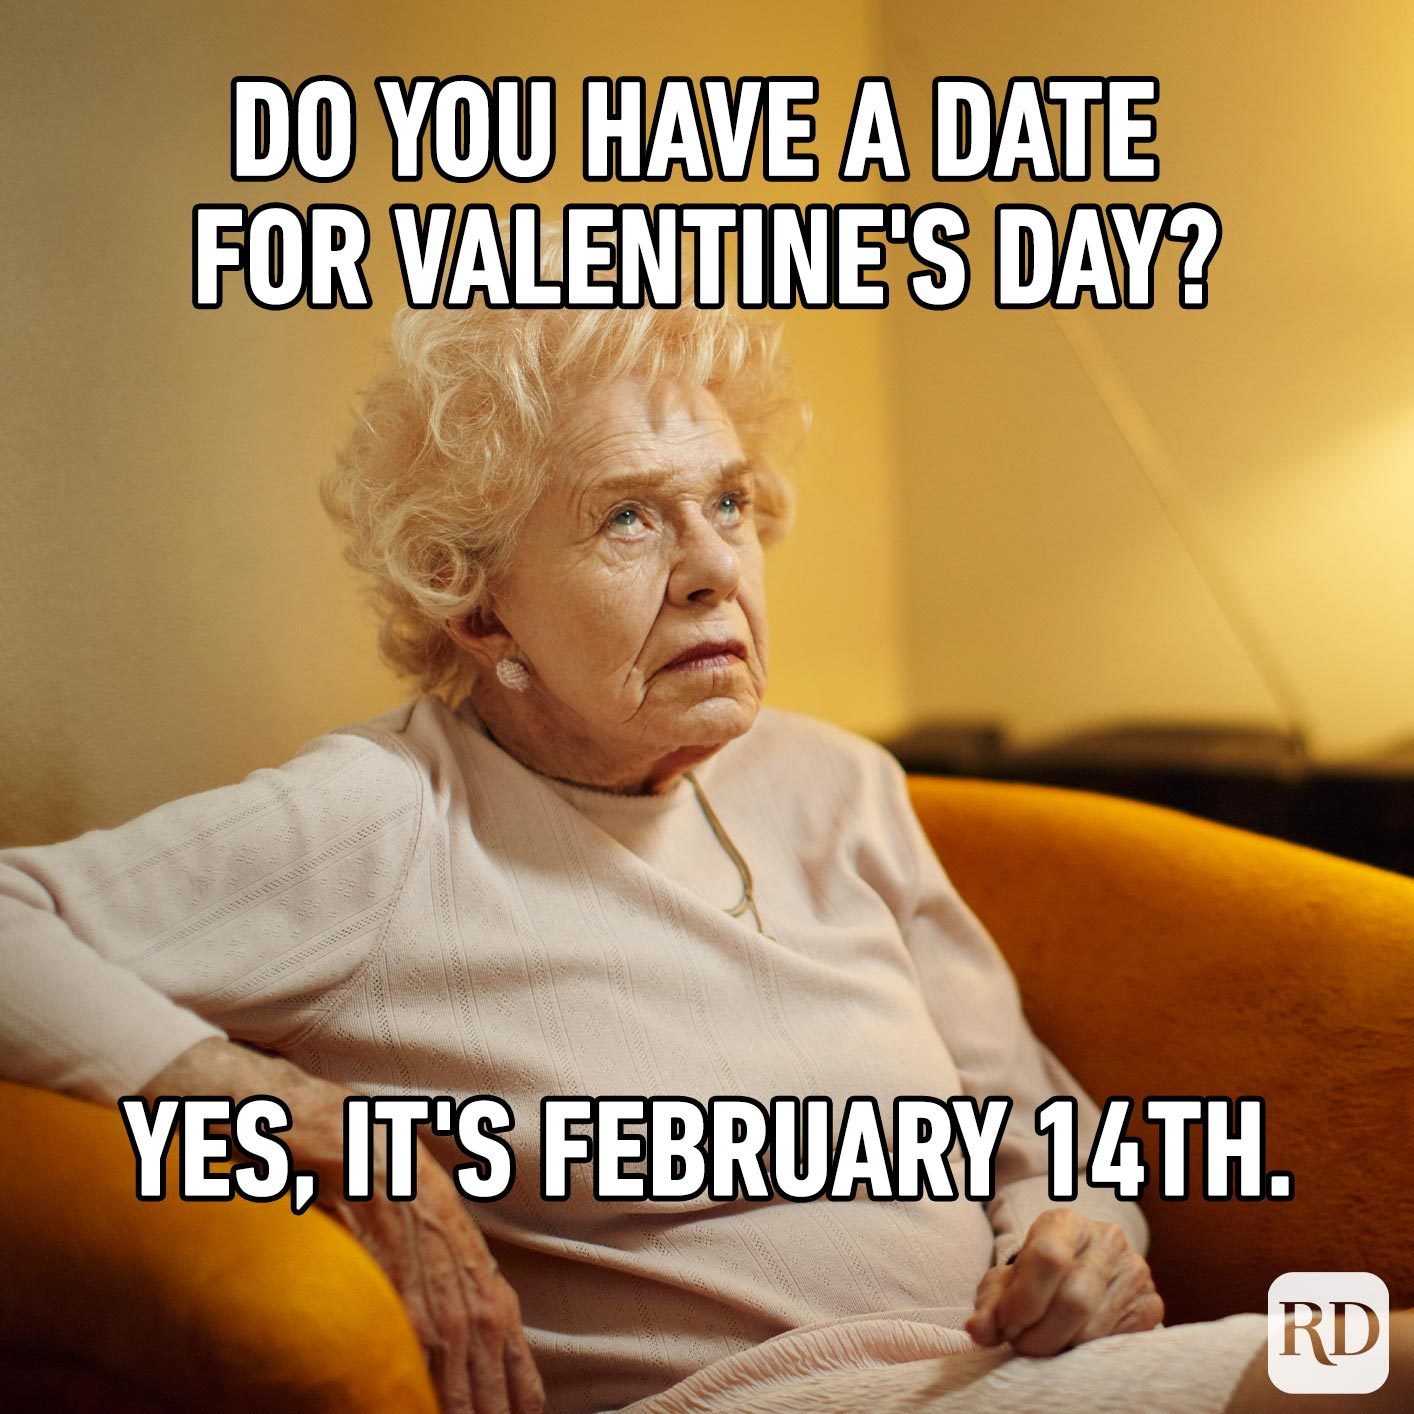 Happy Valentine's Day Meme Friends Hilarious Memes to Share with Your